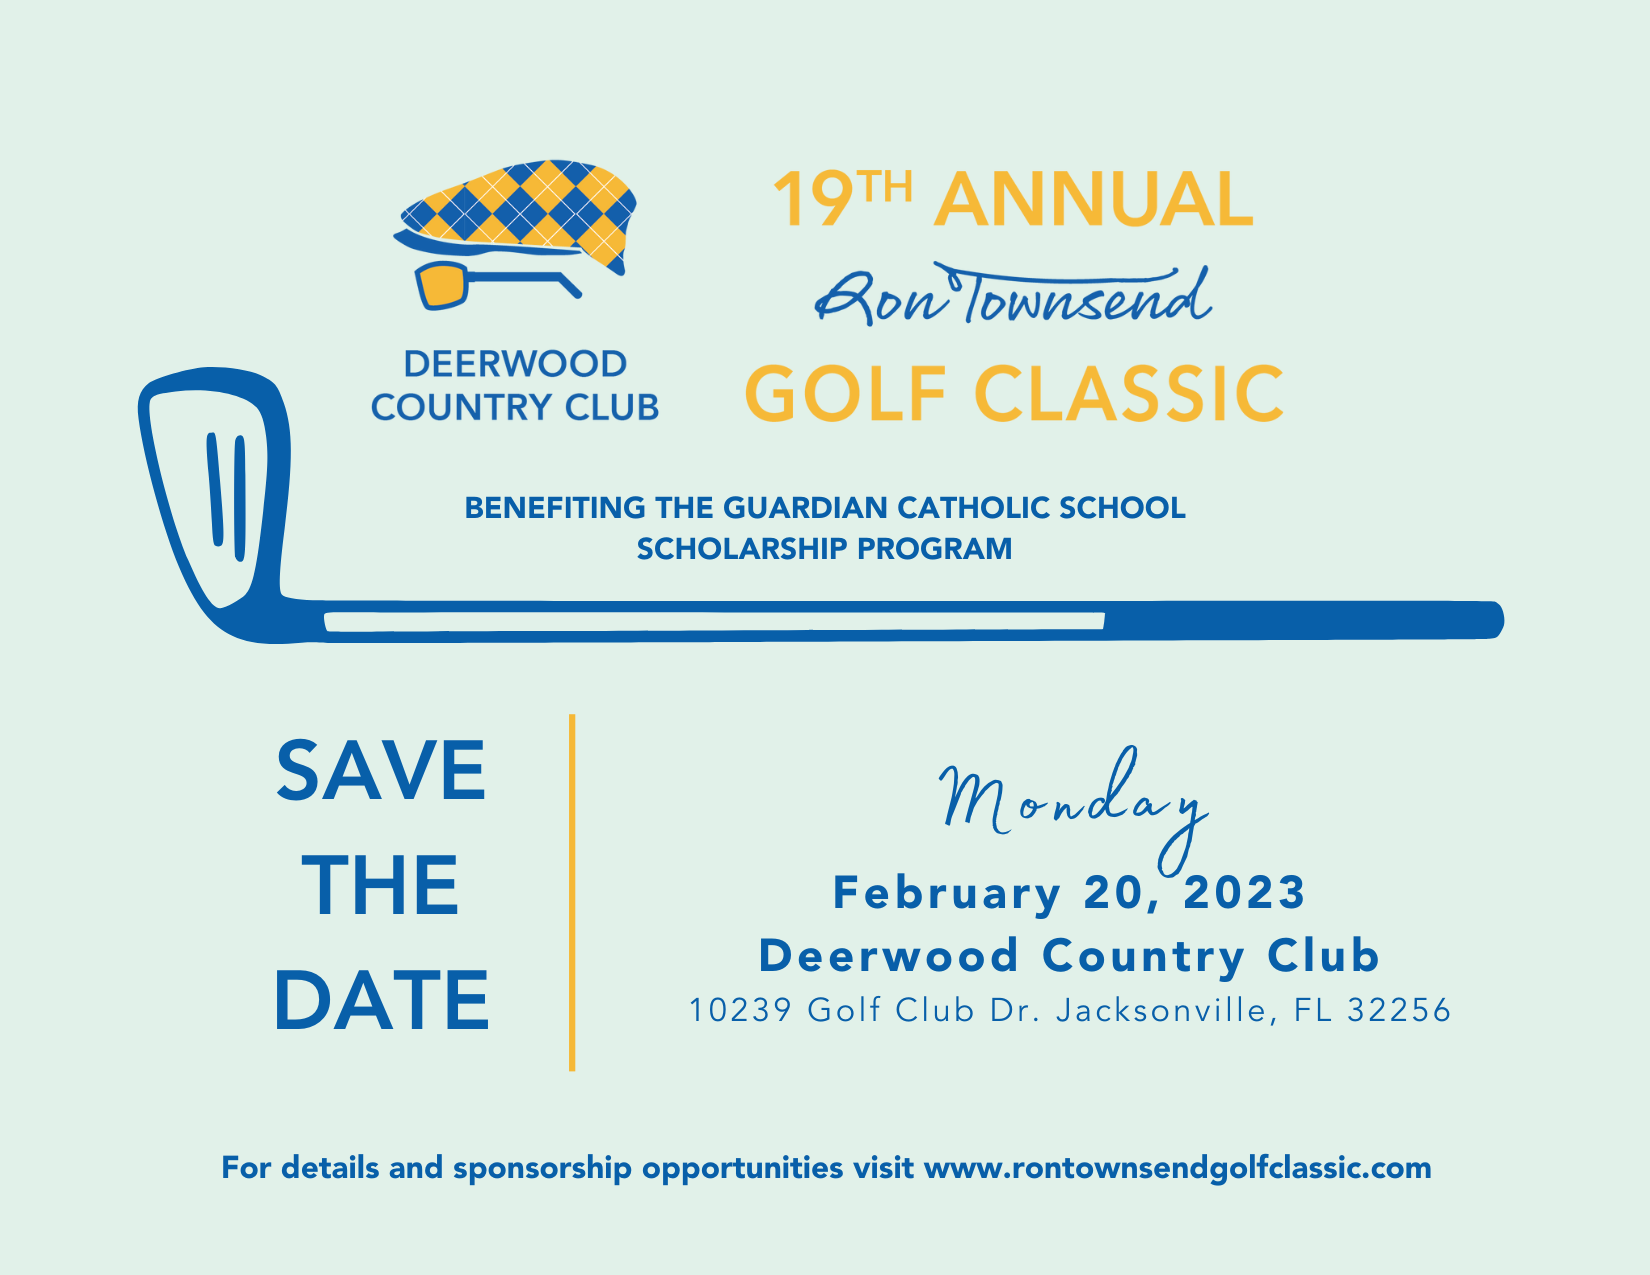 Save the Date 19th Annual Ron Townsend Golf Classic